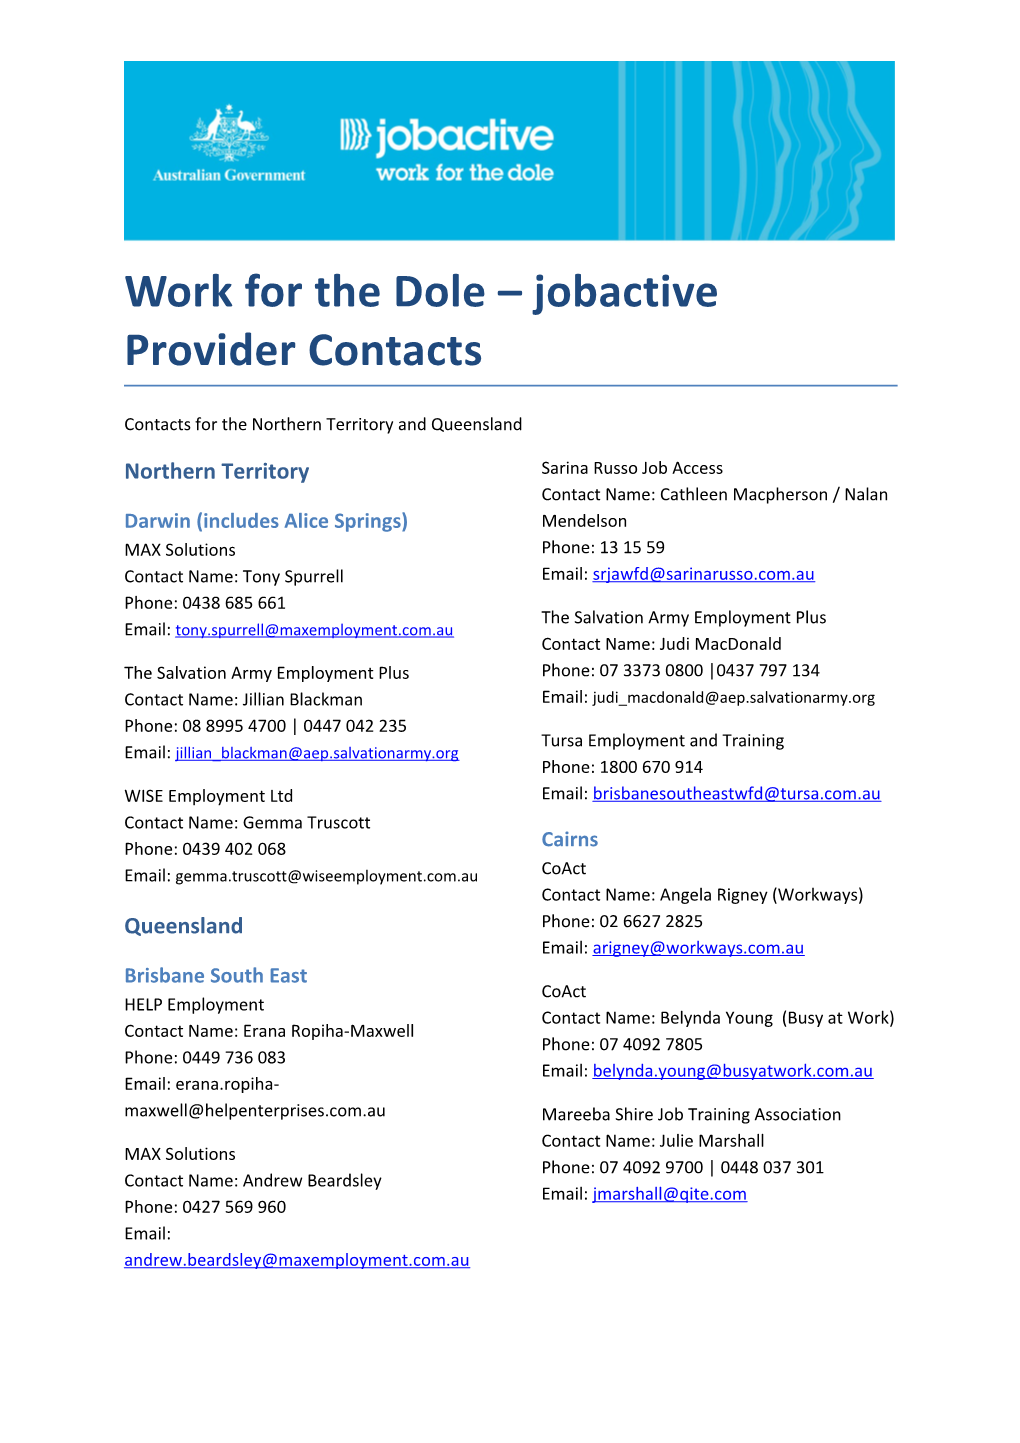 Work for the Dole Jobactive Provider Contacts